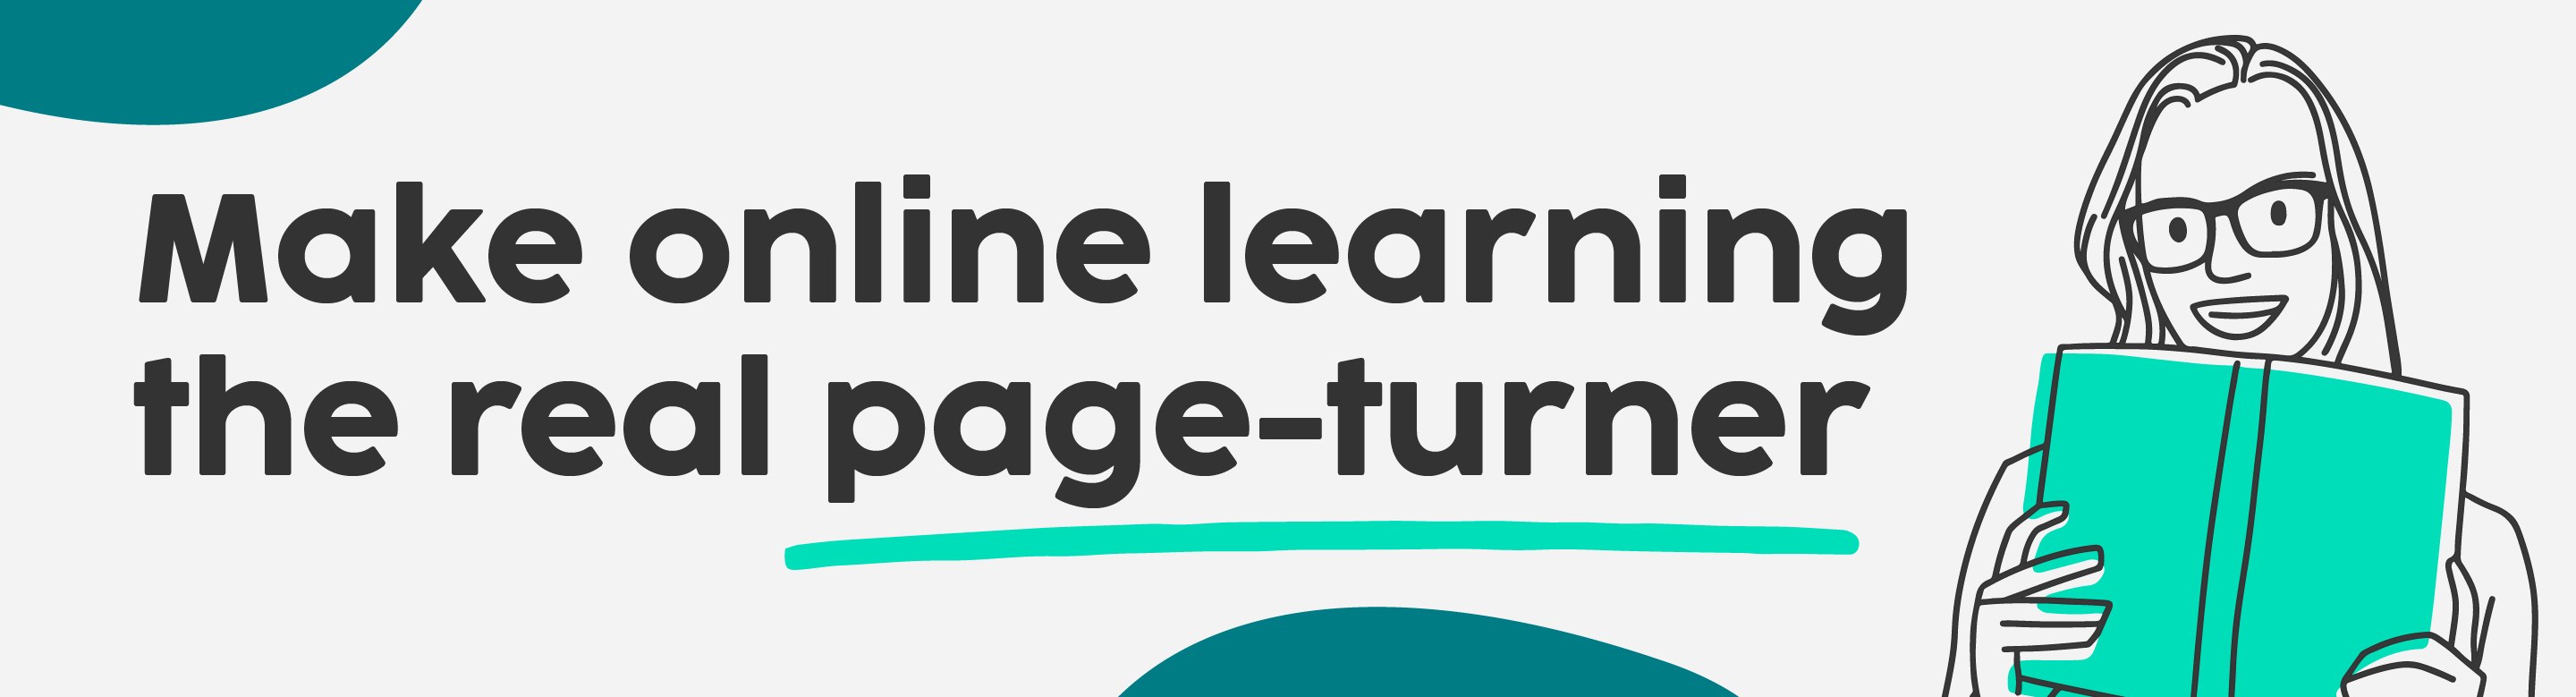 Make online learning the real page turner